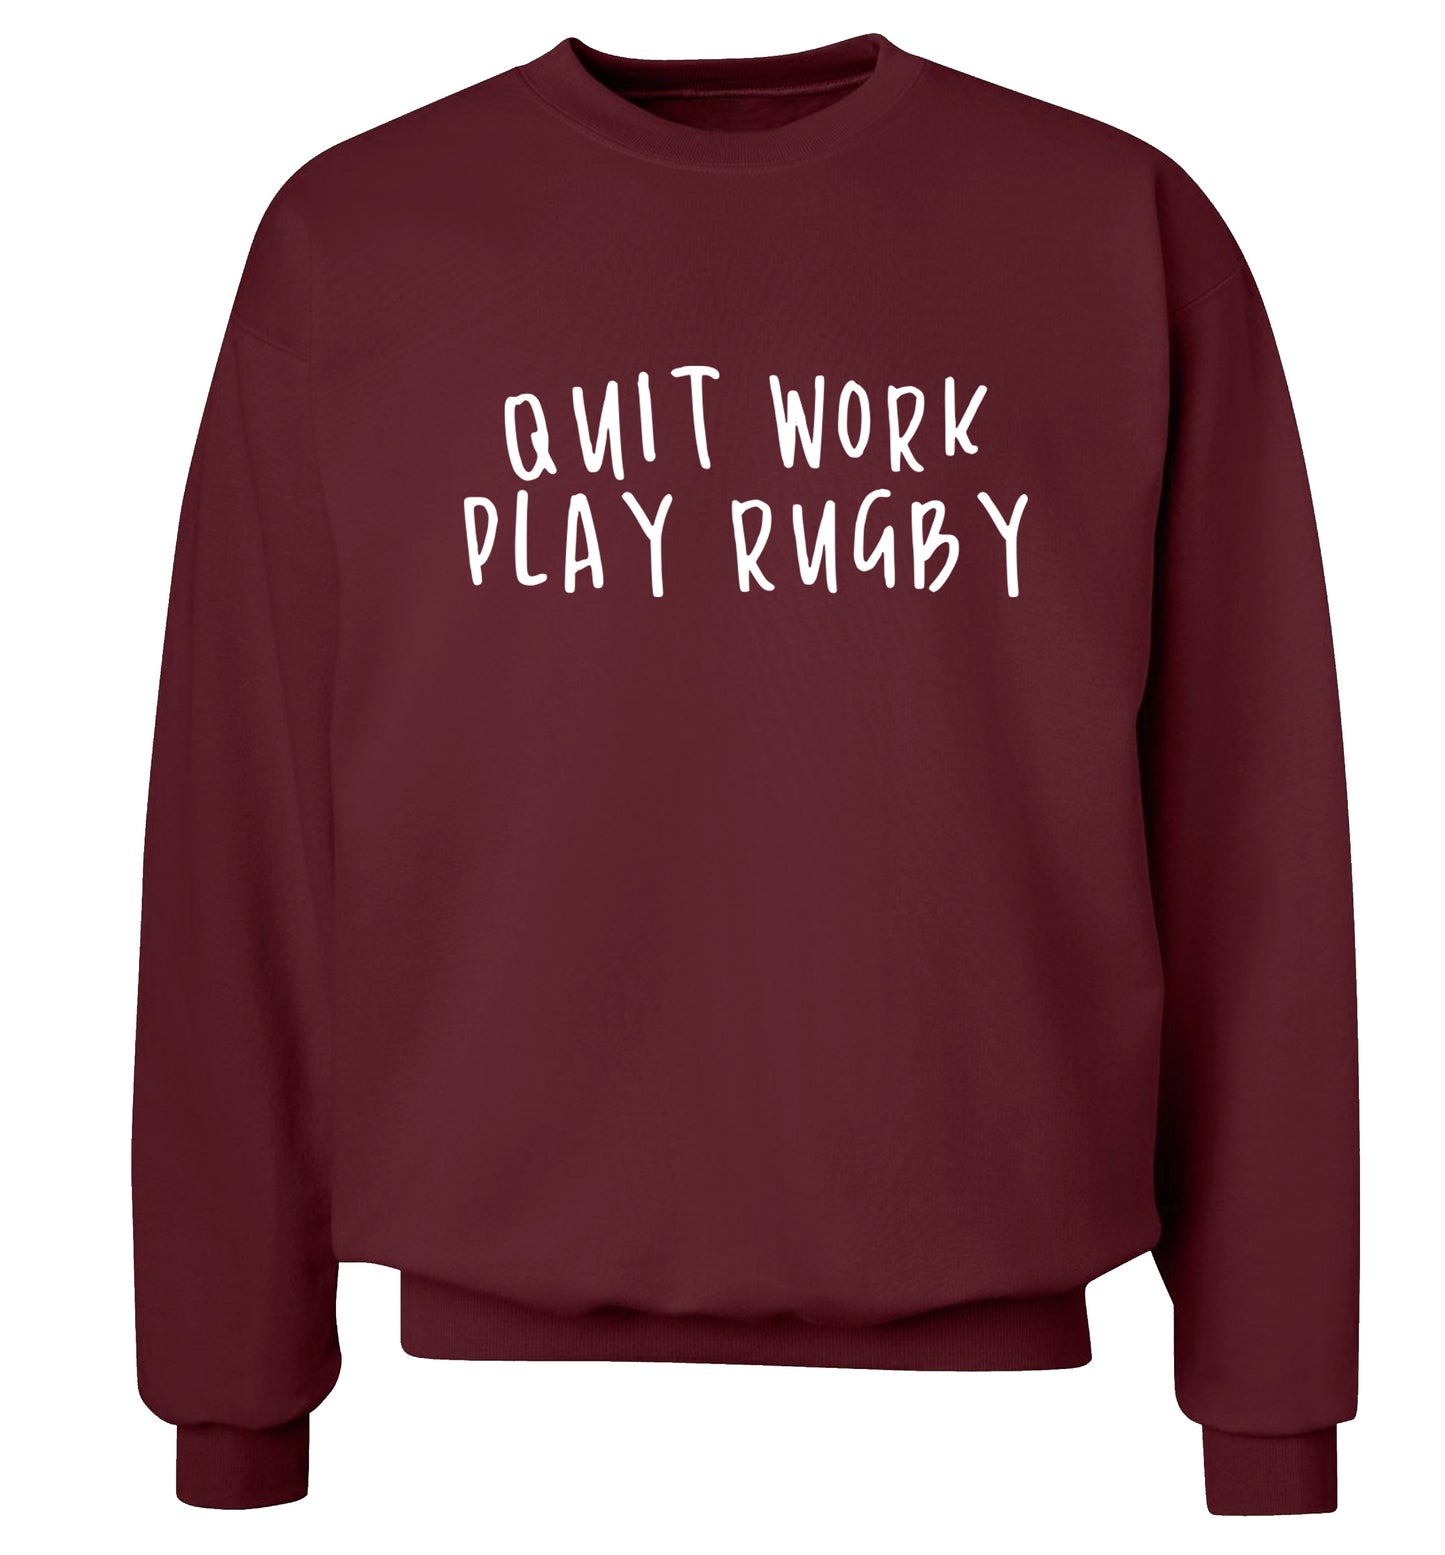 Quit work play rugby Adult's unisex maroon Sweater 2XL